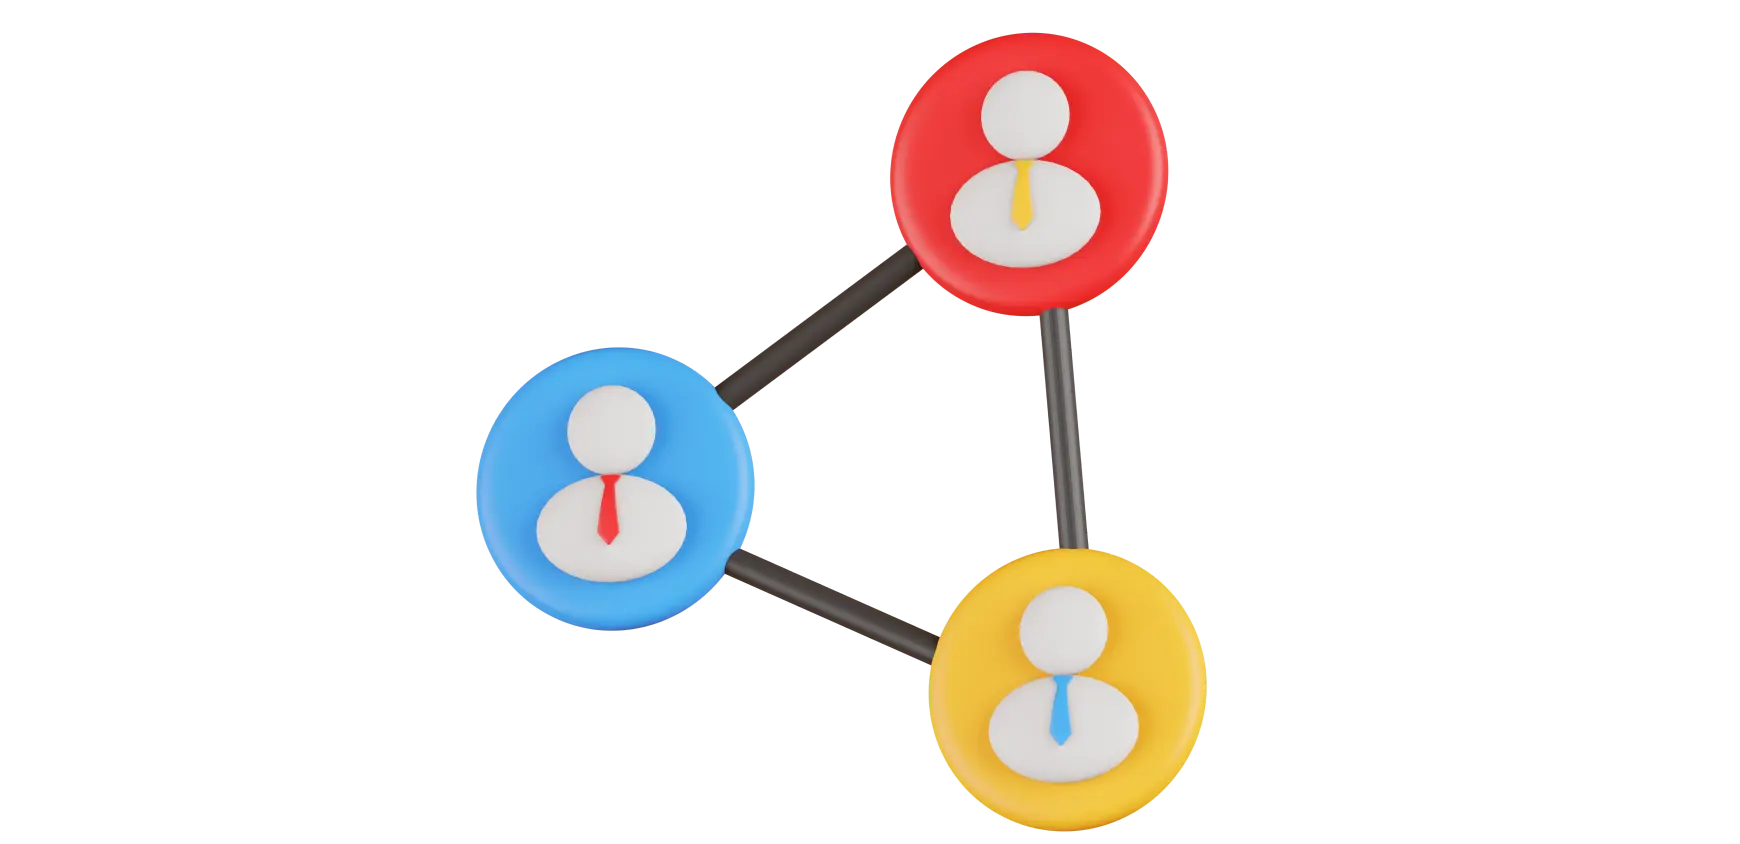 Three connected nodes with user icons